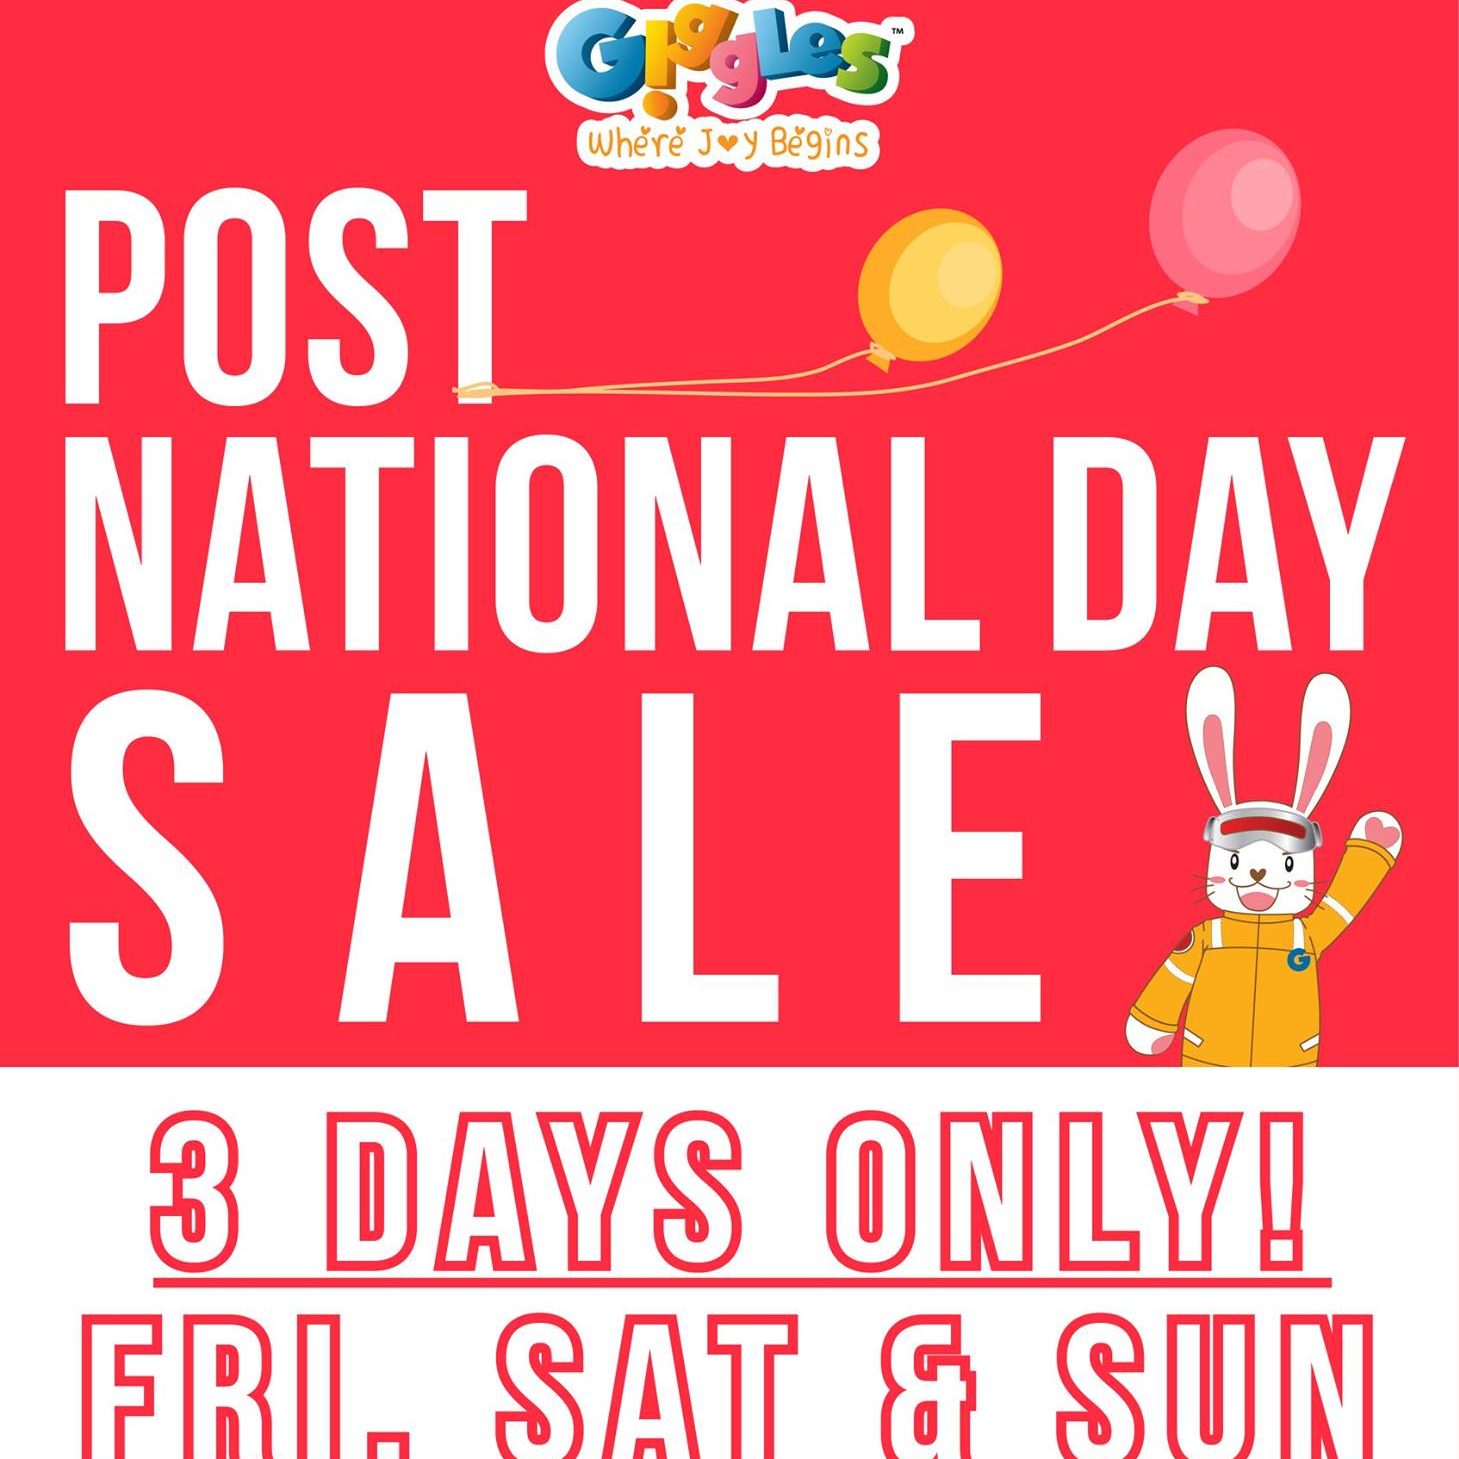 Giggles Post National Day Sale Singapore Promotion ends 14 Aug 2016